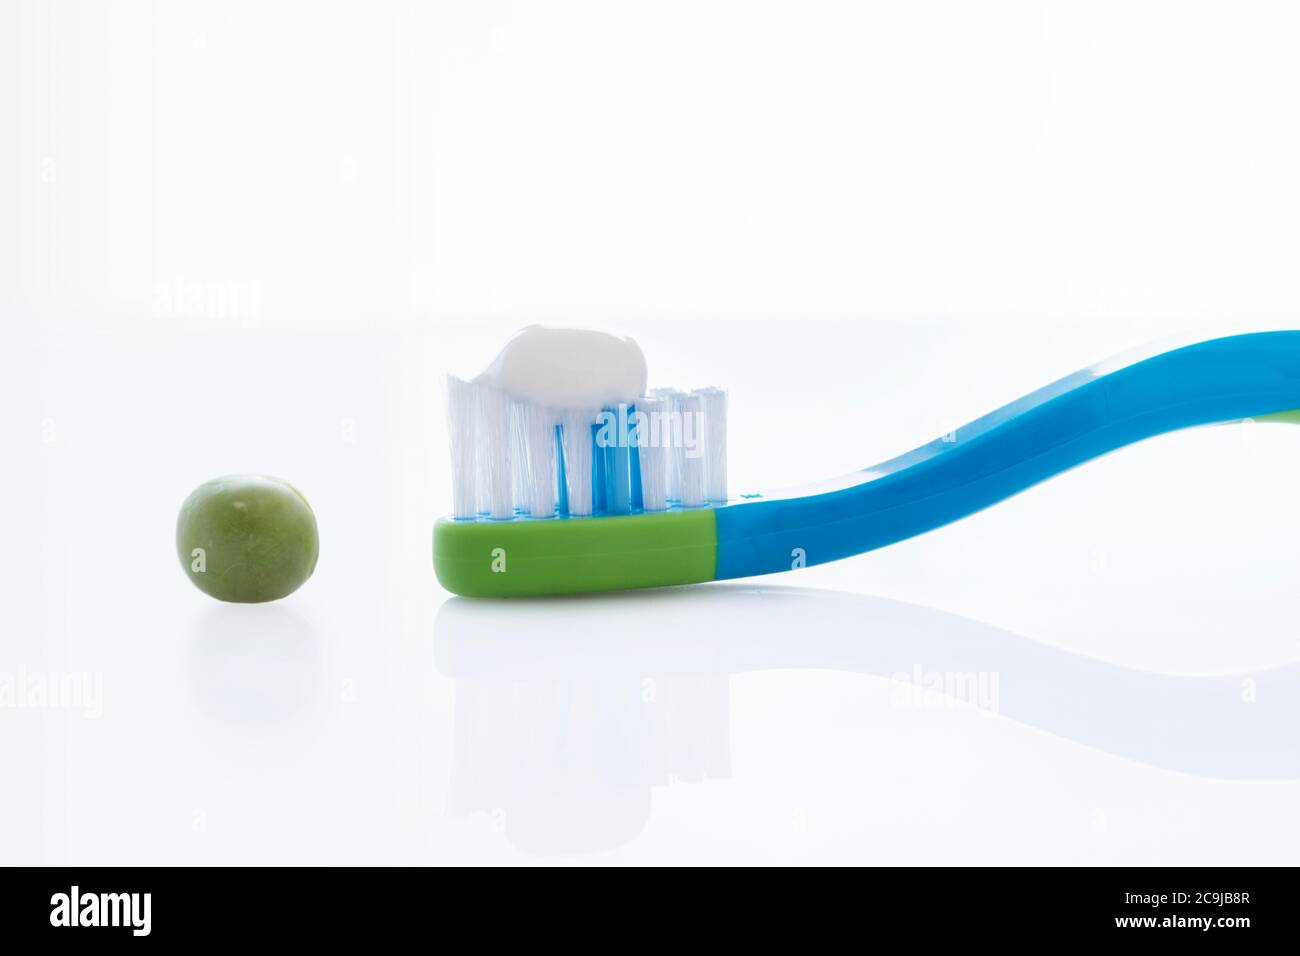 Toothbrush with a pea sized amount of toothpaste against a white background. Stock Photo